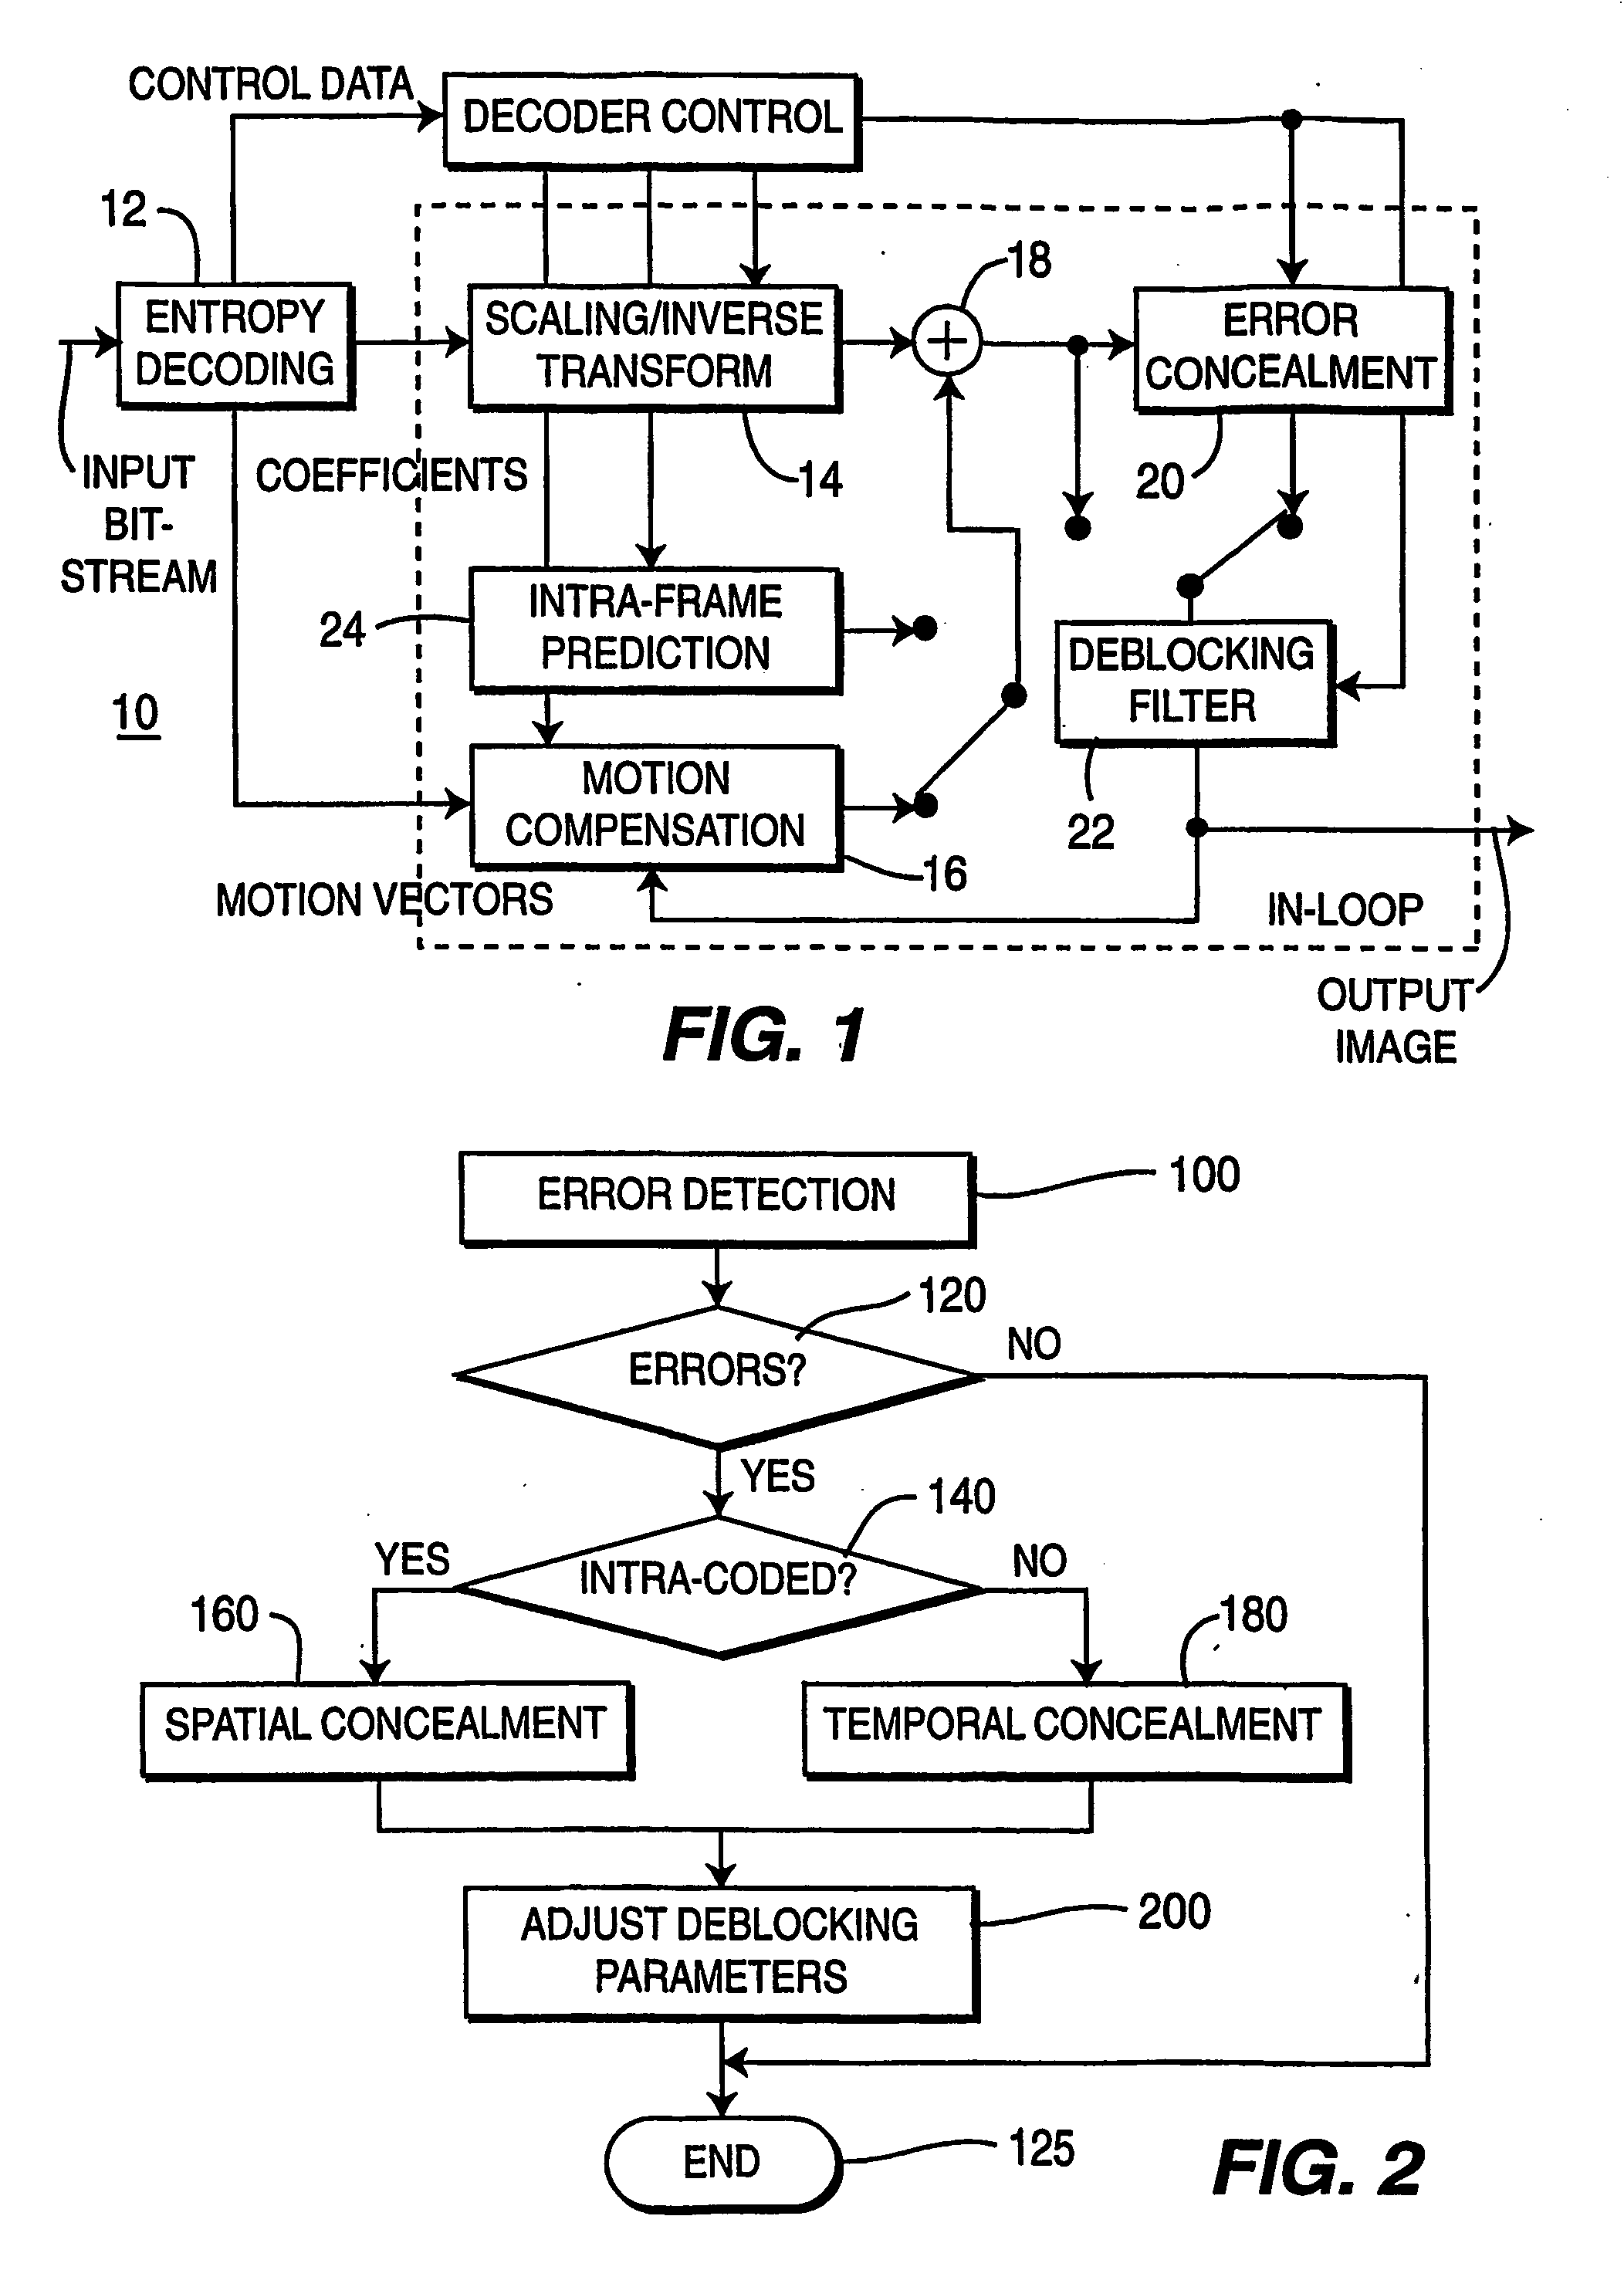 Decoder apparatus and method for smoothing artifacts created during error concealment